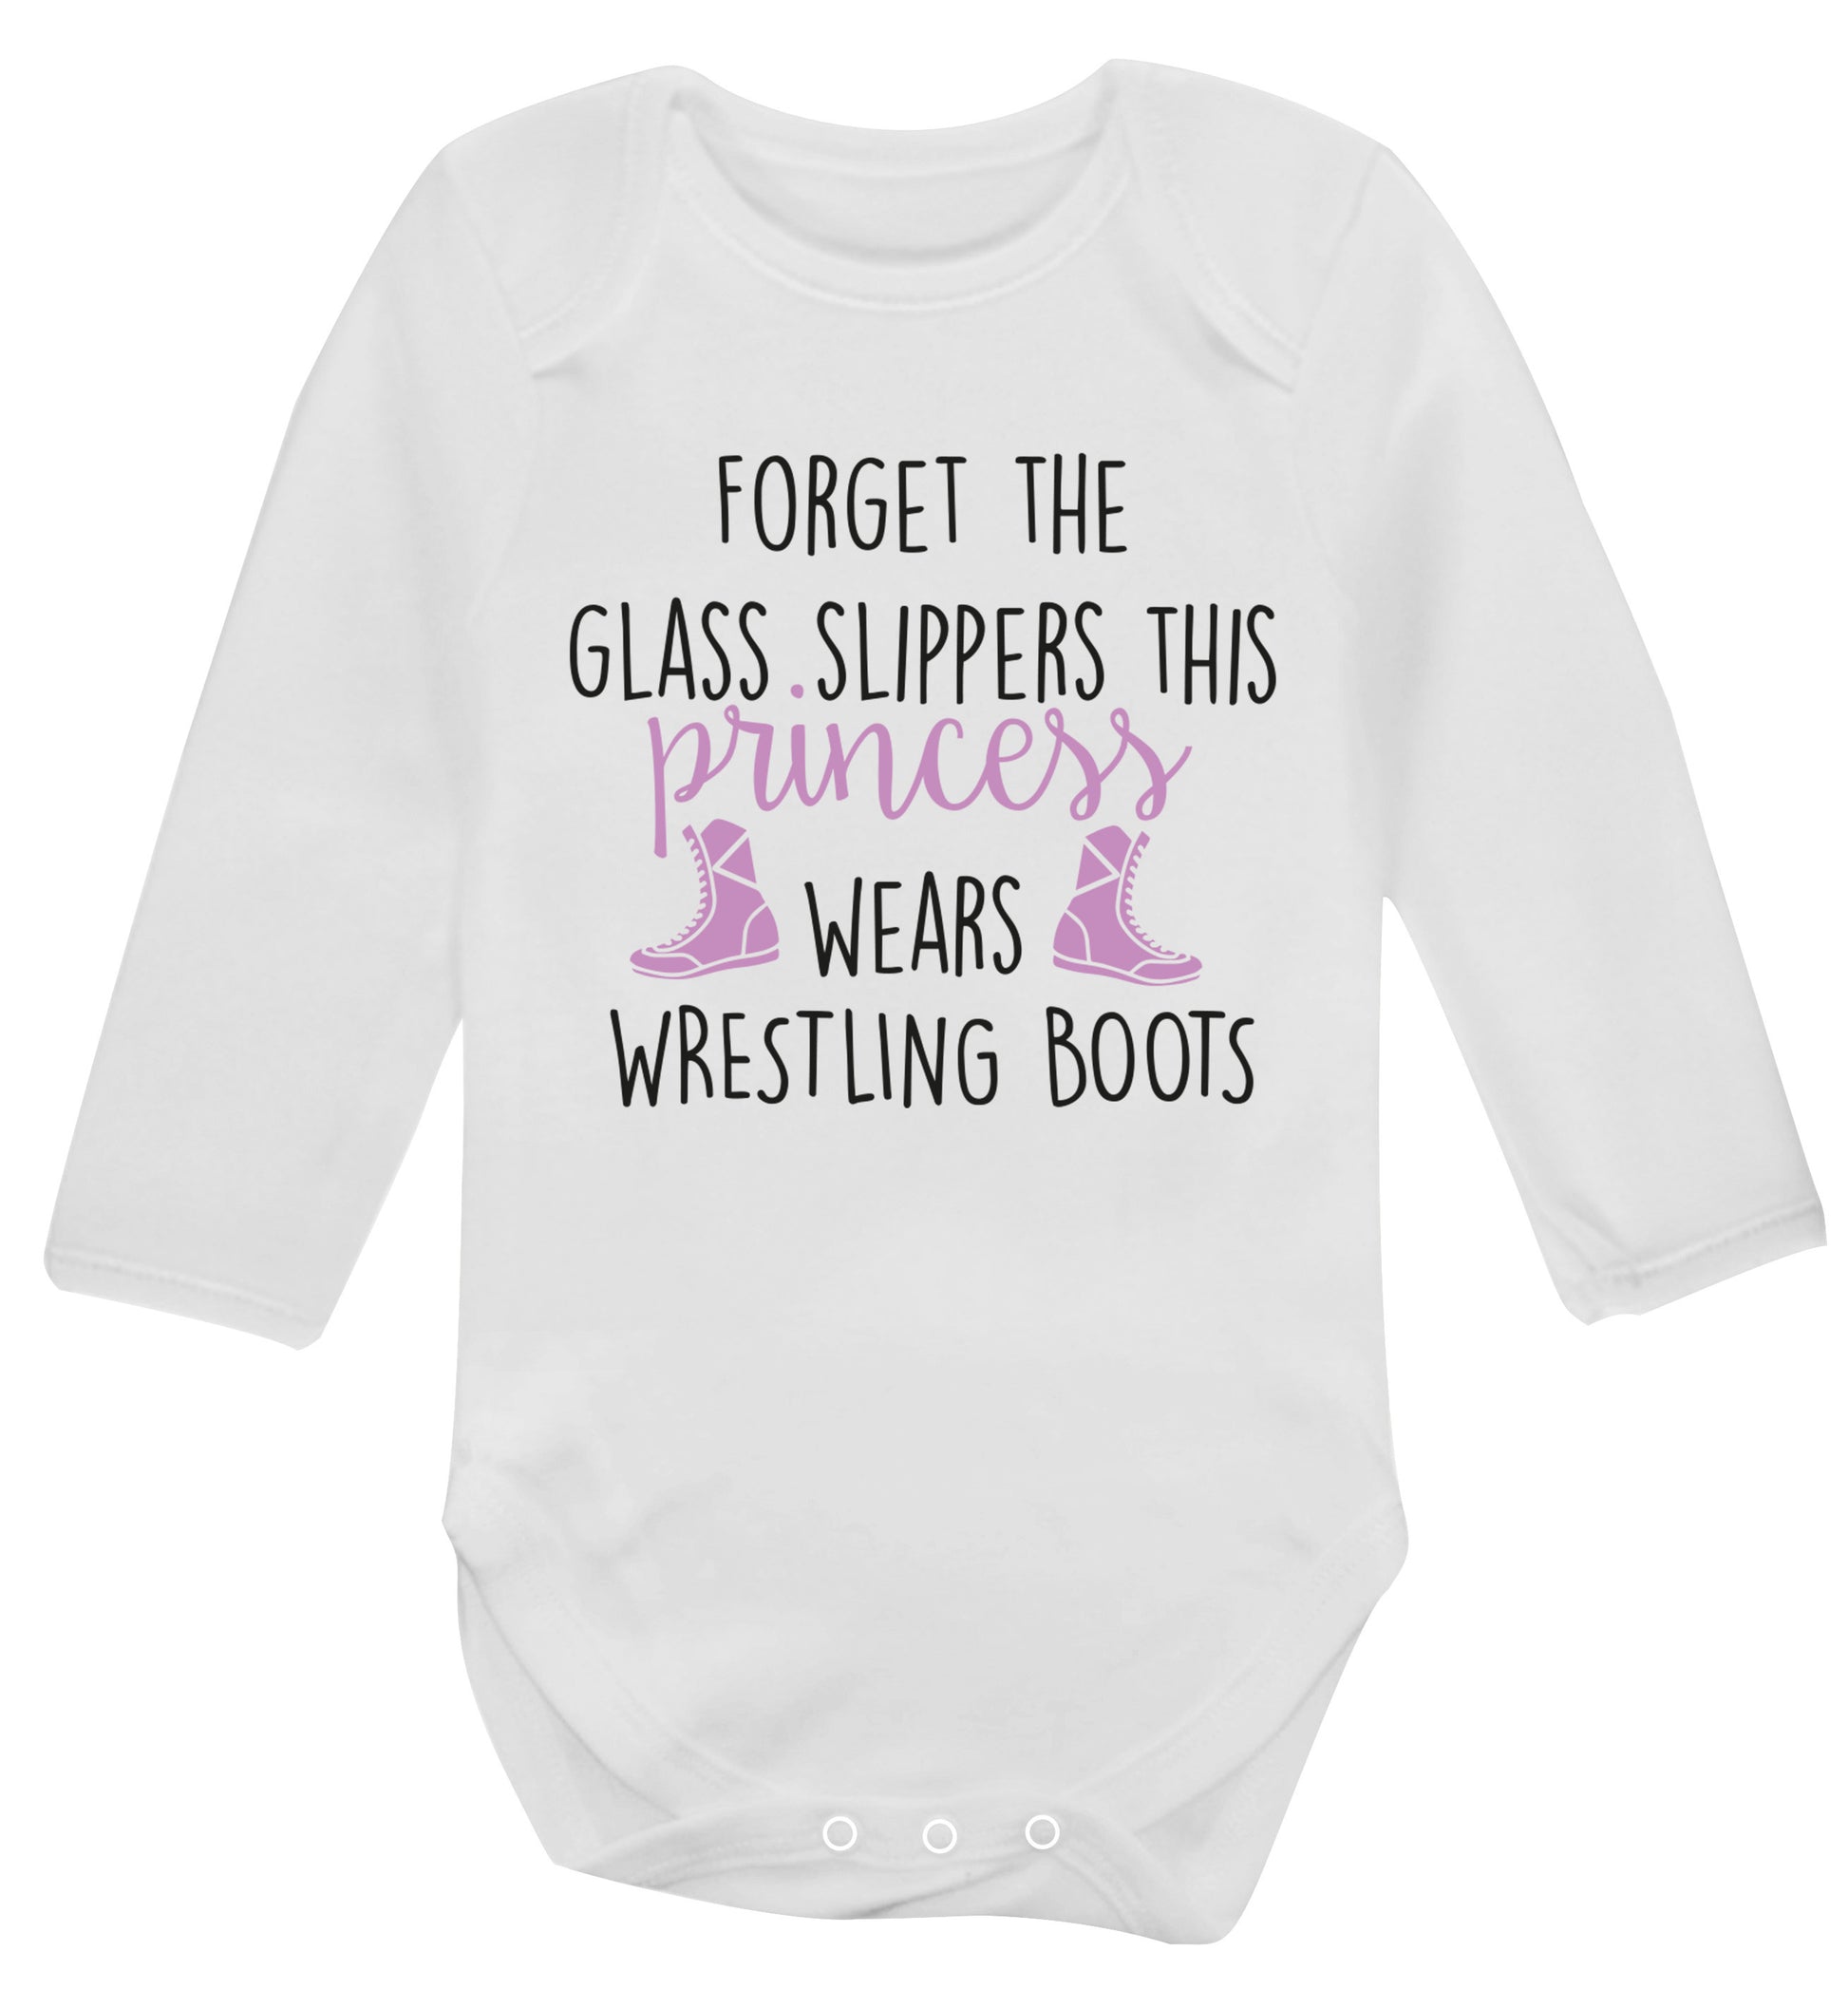 Forget the glass slippers this princess wears wrestling boots Baby Vest long sleeved white 6-12 months